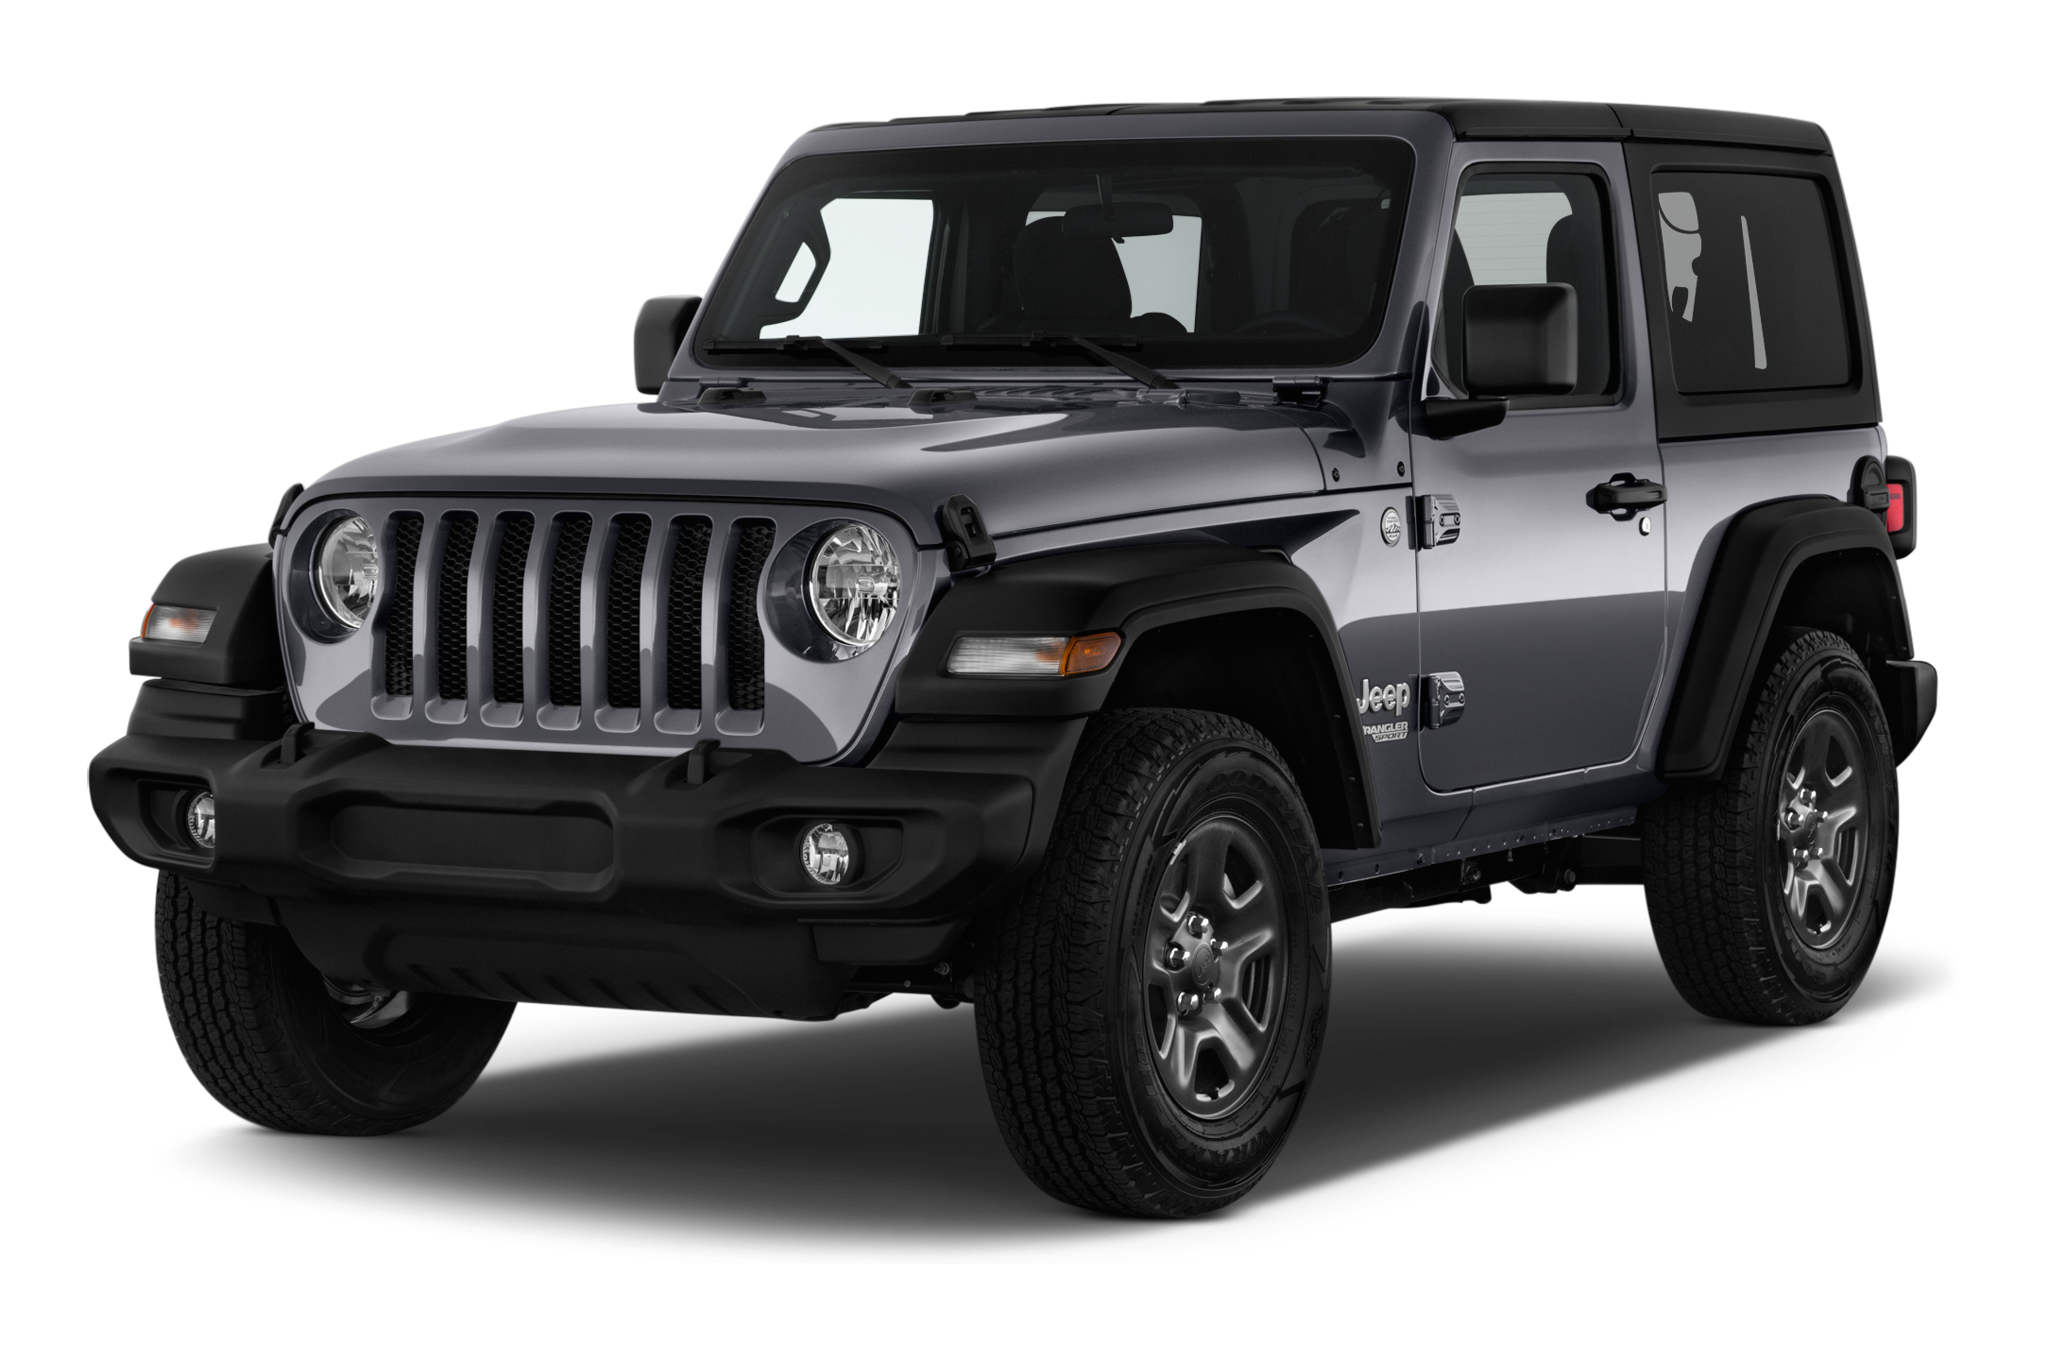 Jeep Wrangler 2018 PNG Background